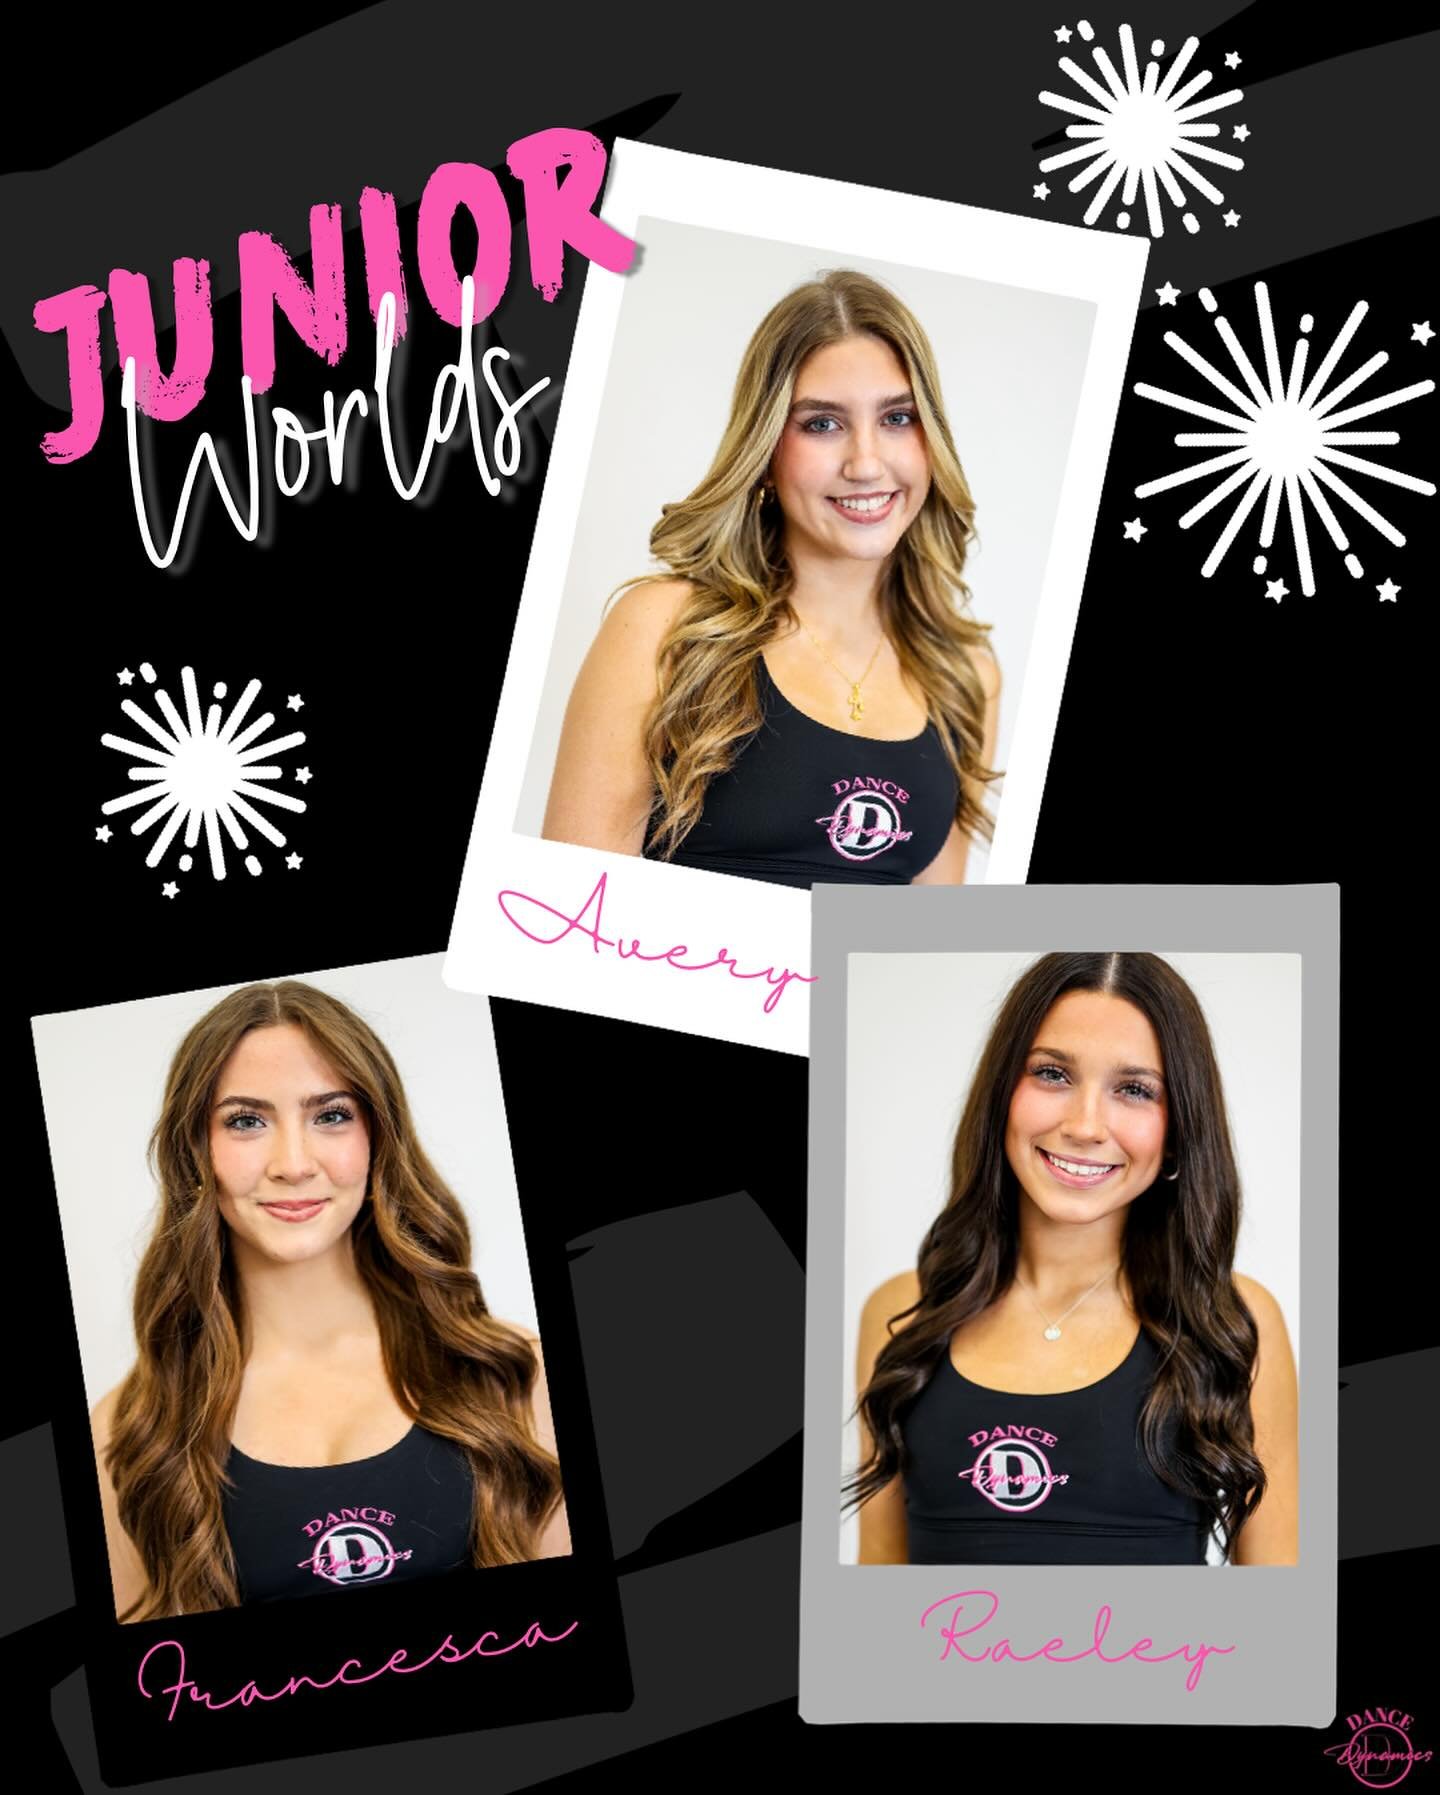 ✨ITS THE FINAL WORLDS WEDNESDAY!✨ 

It&rsquo;s time to meet our 1st ever Junior Worlds team! Most of these girls will be taking the world&rsquo;s stage for the very first time so let&rsquo;s show them some love!

#dd4l #dancedynamics #ddseniors